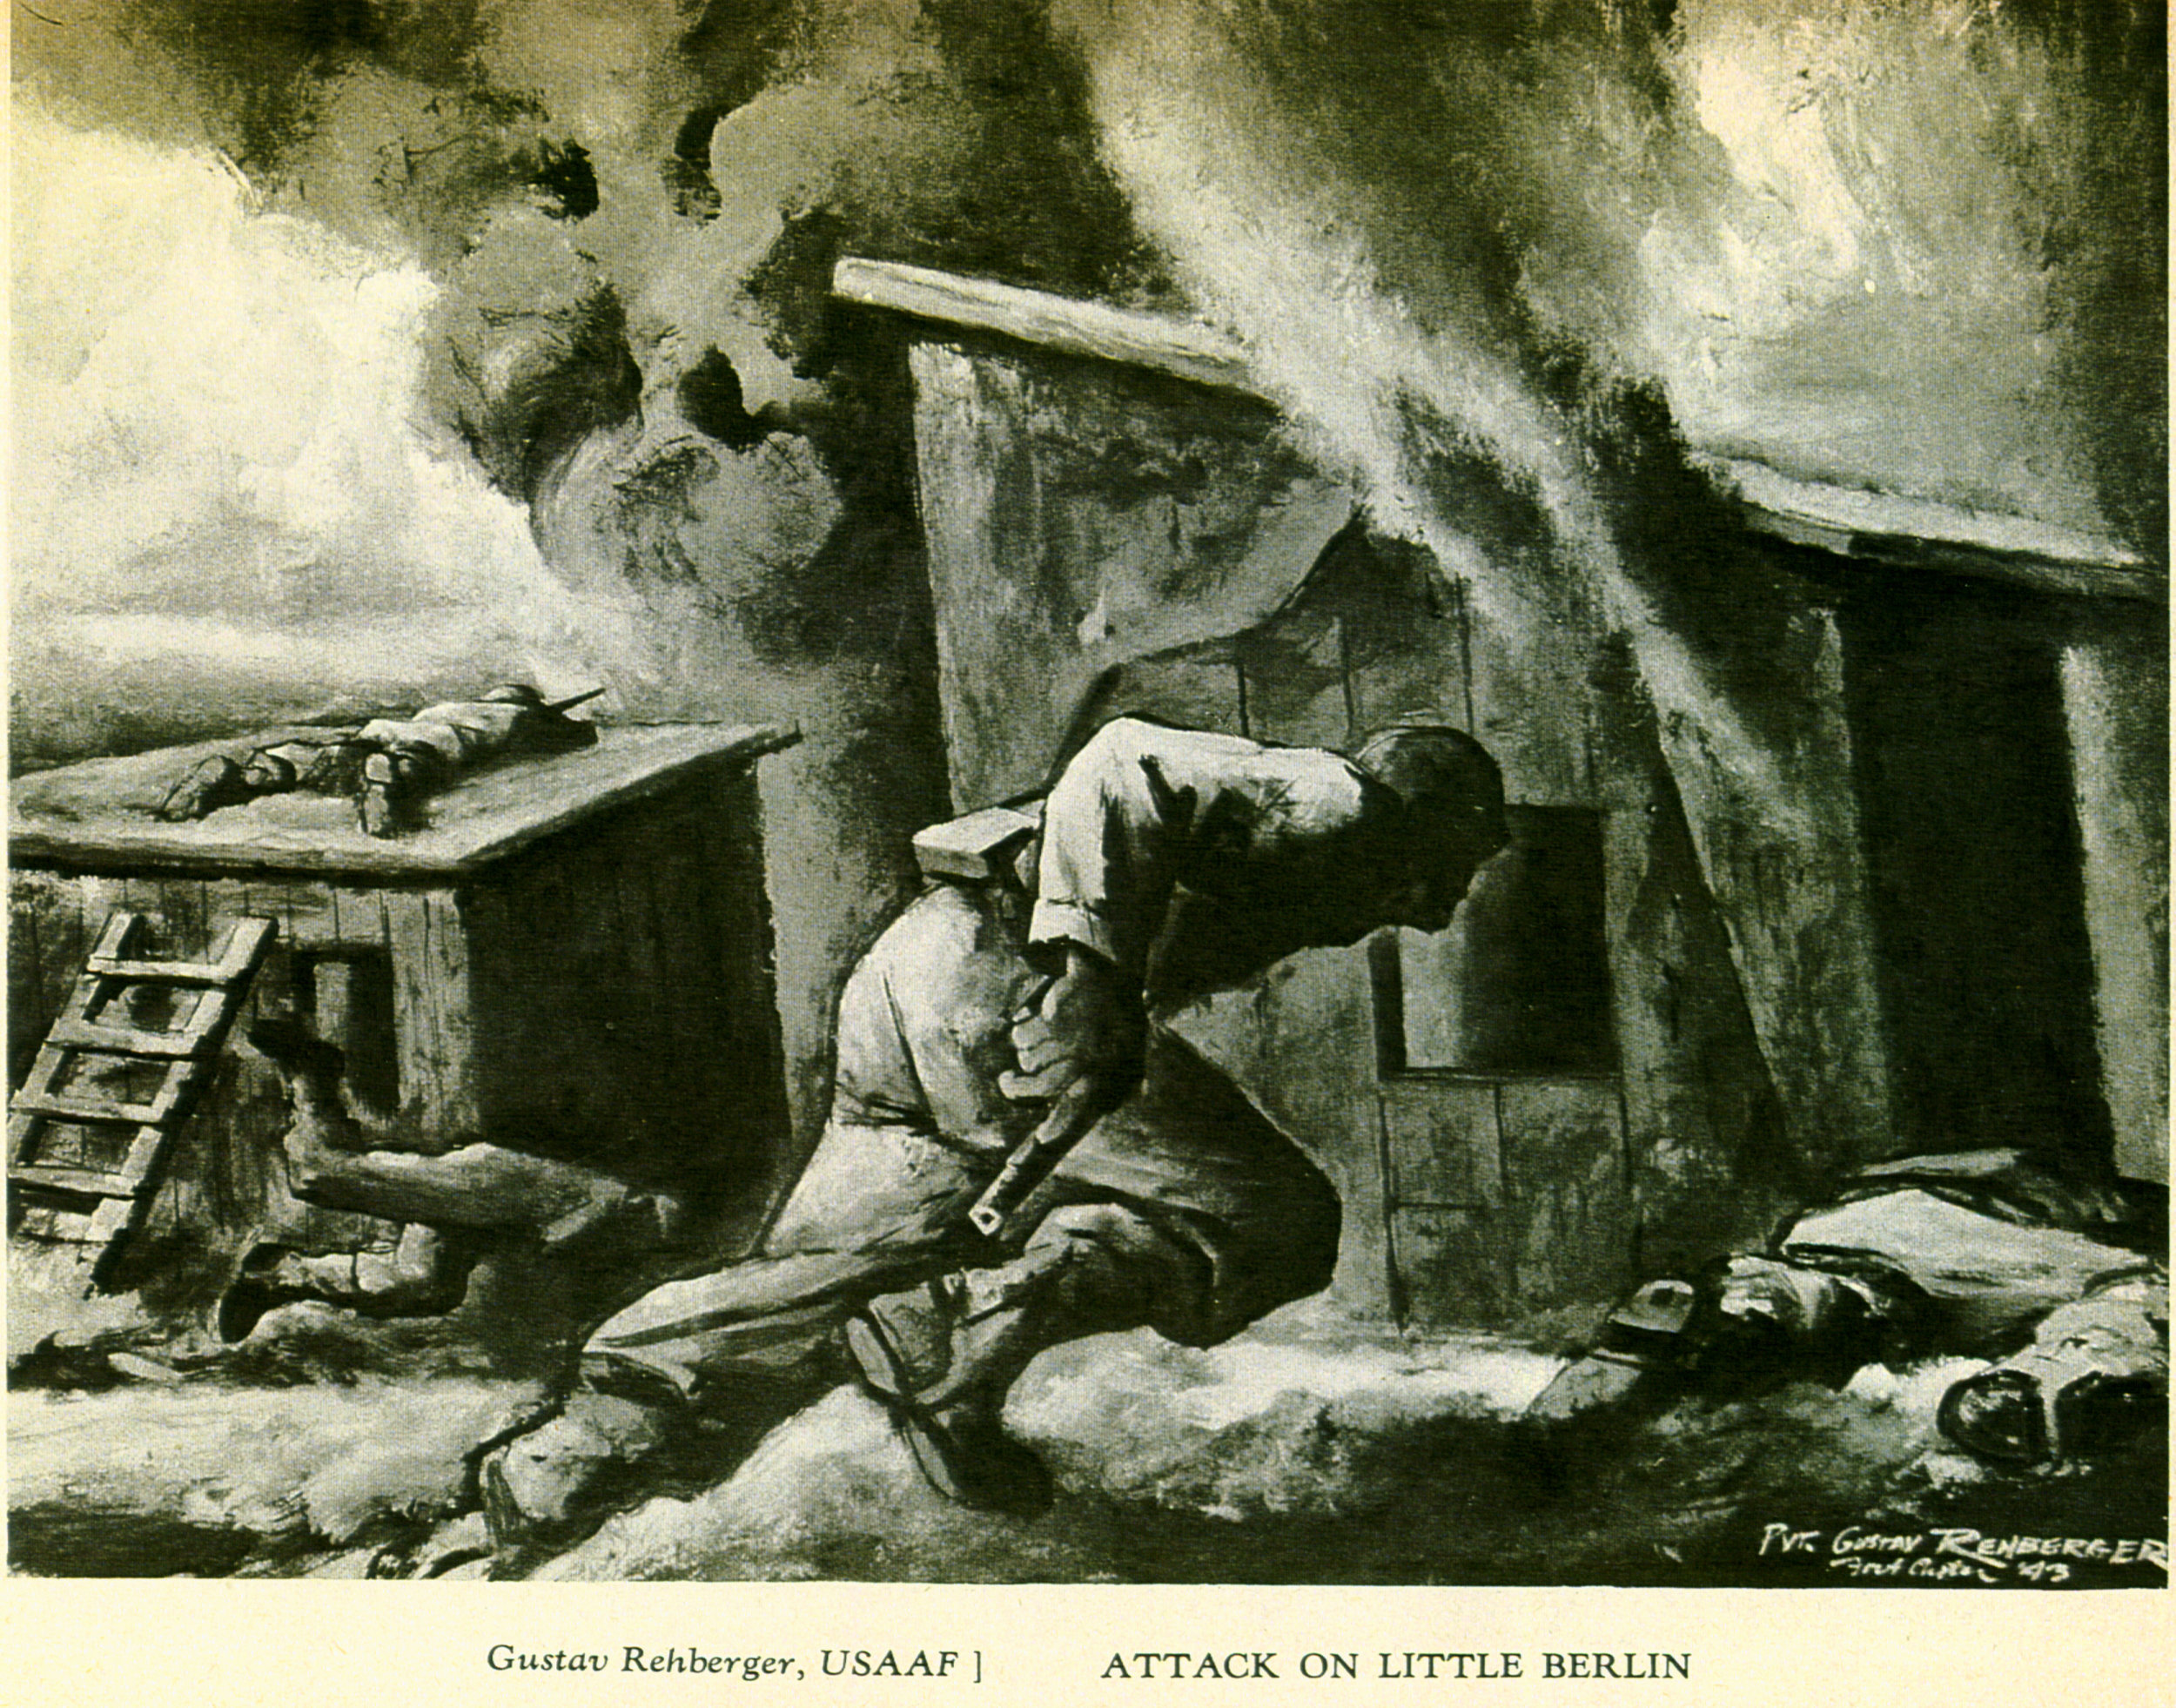 "Attack on Little Berlin" - Army Illustrators of Fort Custer, Michigan 1944 - Art in the Armed Forces - Pictured by Men in Action, Edited by Aimee Crane